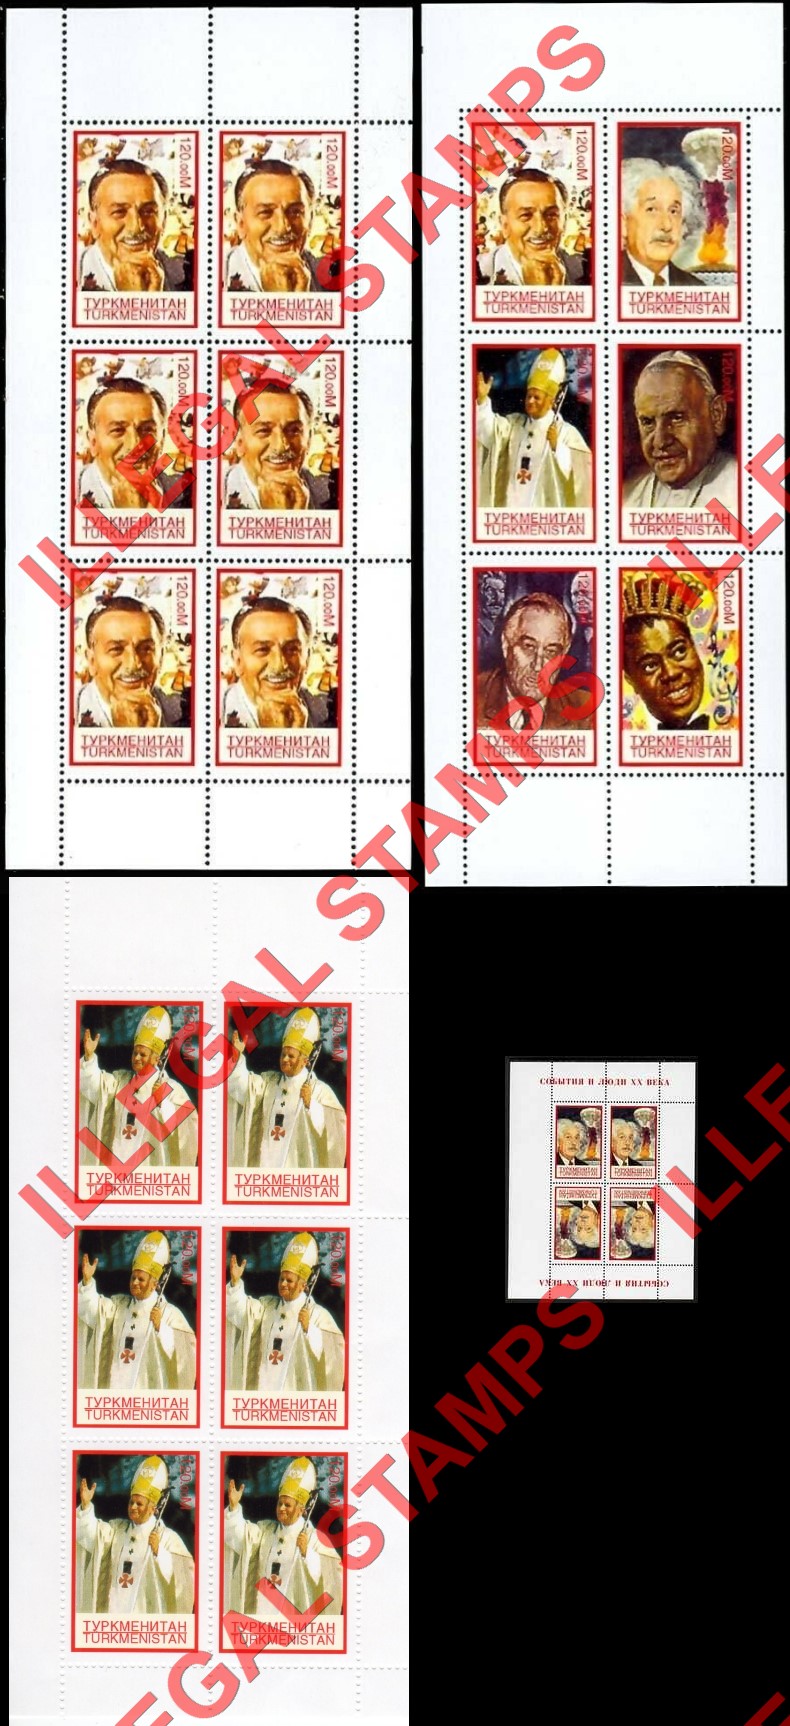 Turkmenistan 1999 Personalities Illegal Stamp Souvenir Sheets of 6 and 4